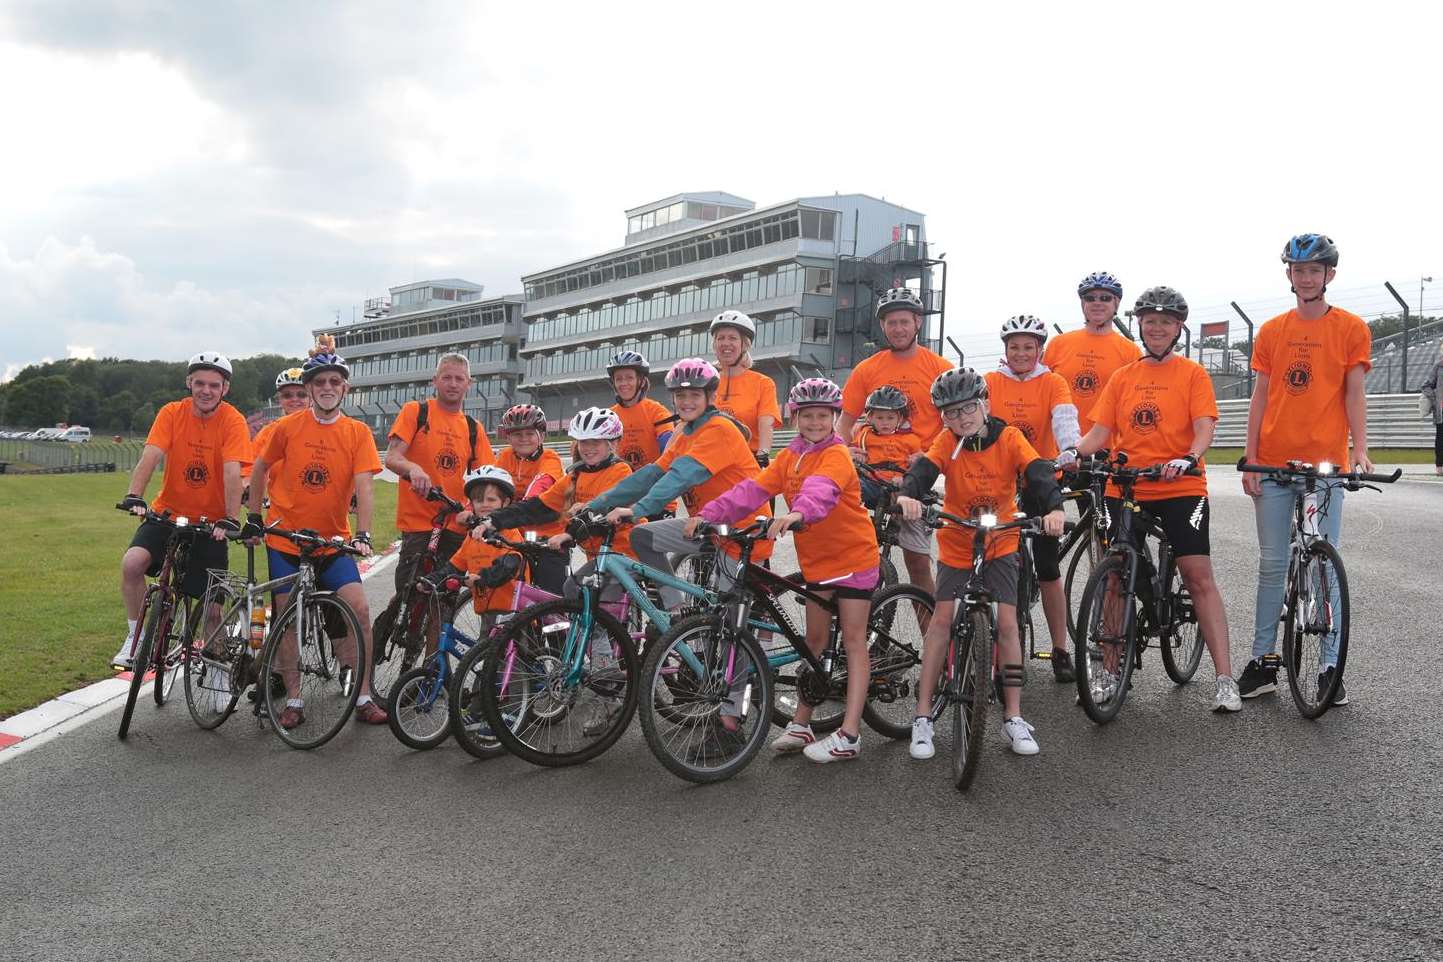 Bob Kneller, of Redhill Wood, celebrates his 80th birthday with four generations of his family riding around the race circuit to raise money for EllenorLions Hospices.